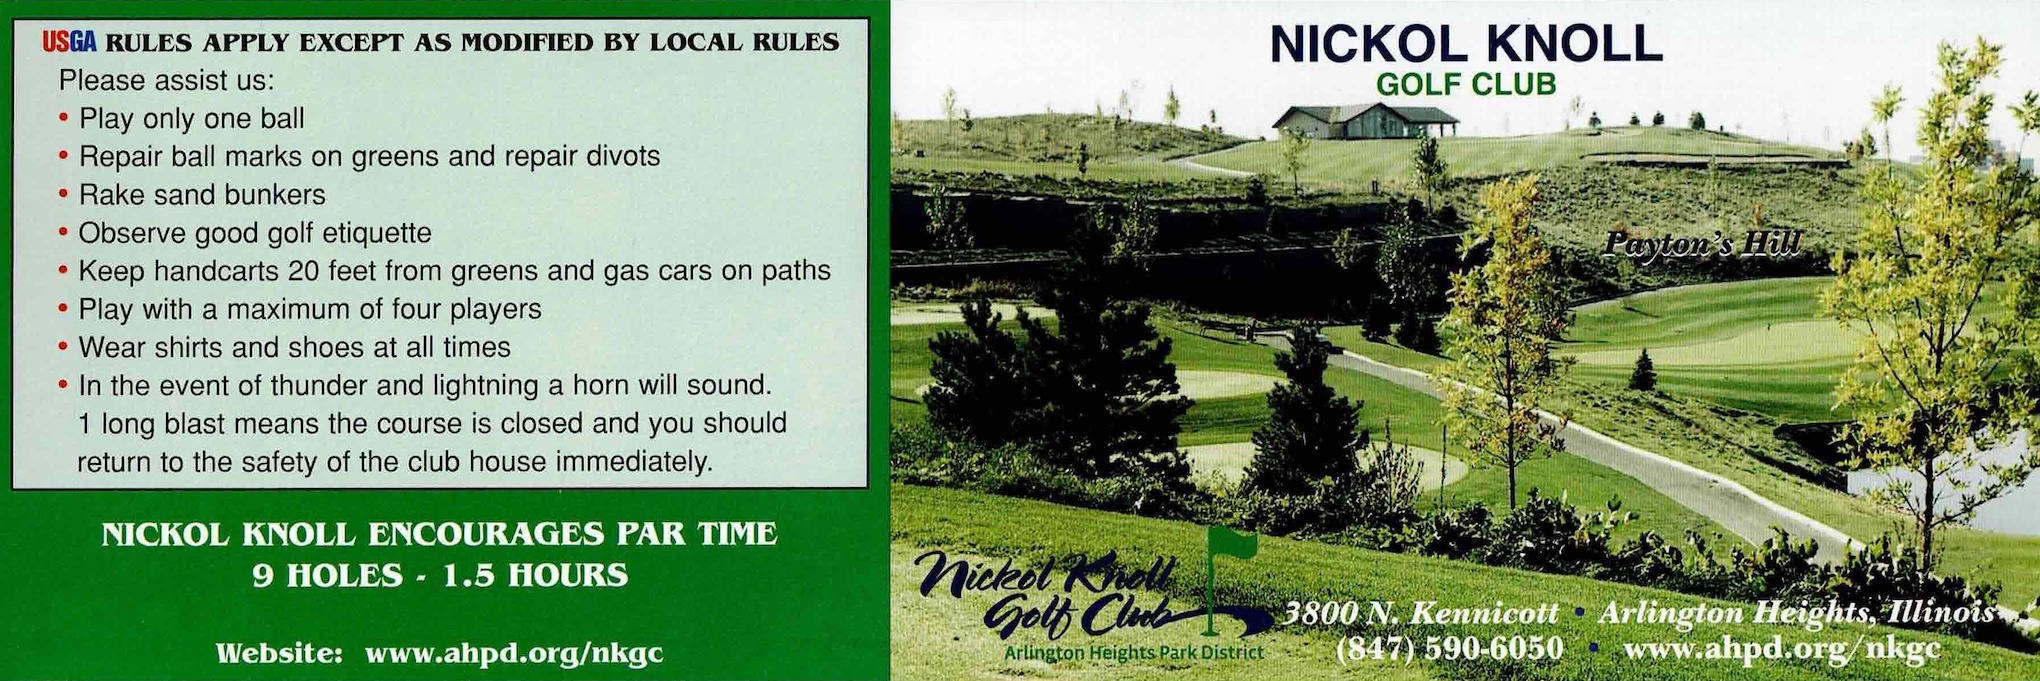 Scan of the scorecard from Nickol Knoll Golf Club in Arlington Heights, Illinois. 